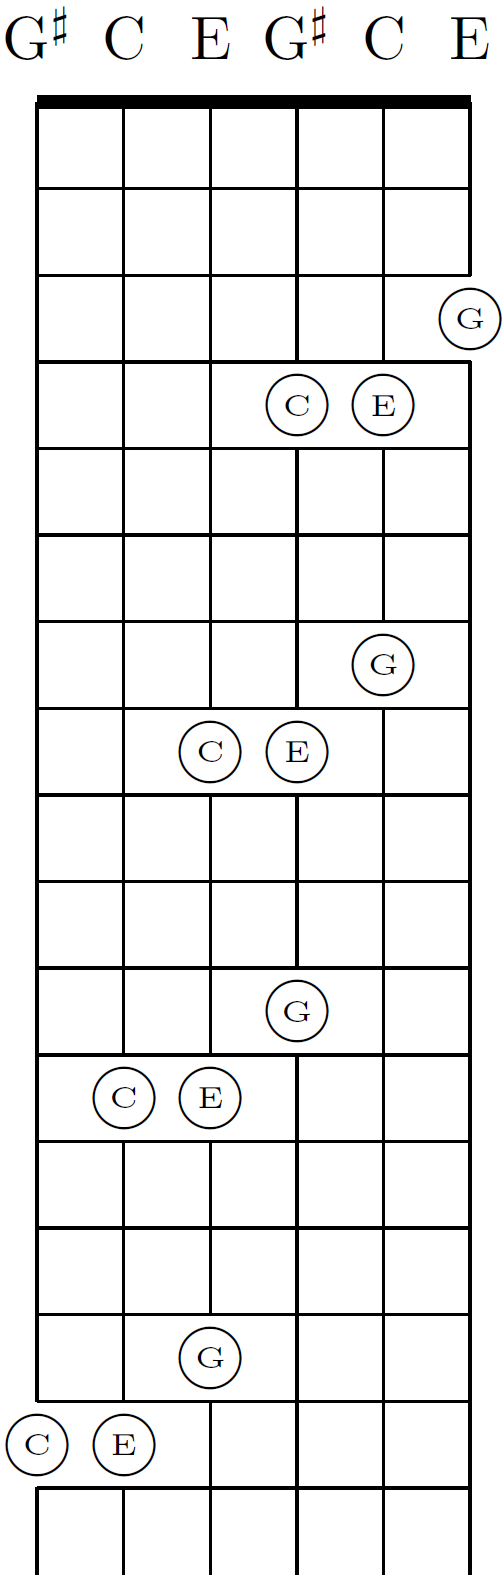 Chords can be shifted diagonally in major-thirds tuning and other regular tunings. In standard tuning, chords change their shape because of the irregular major-third G-B.